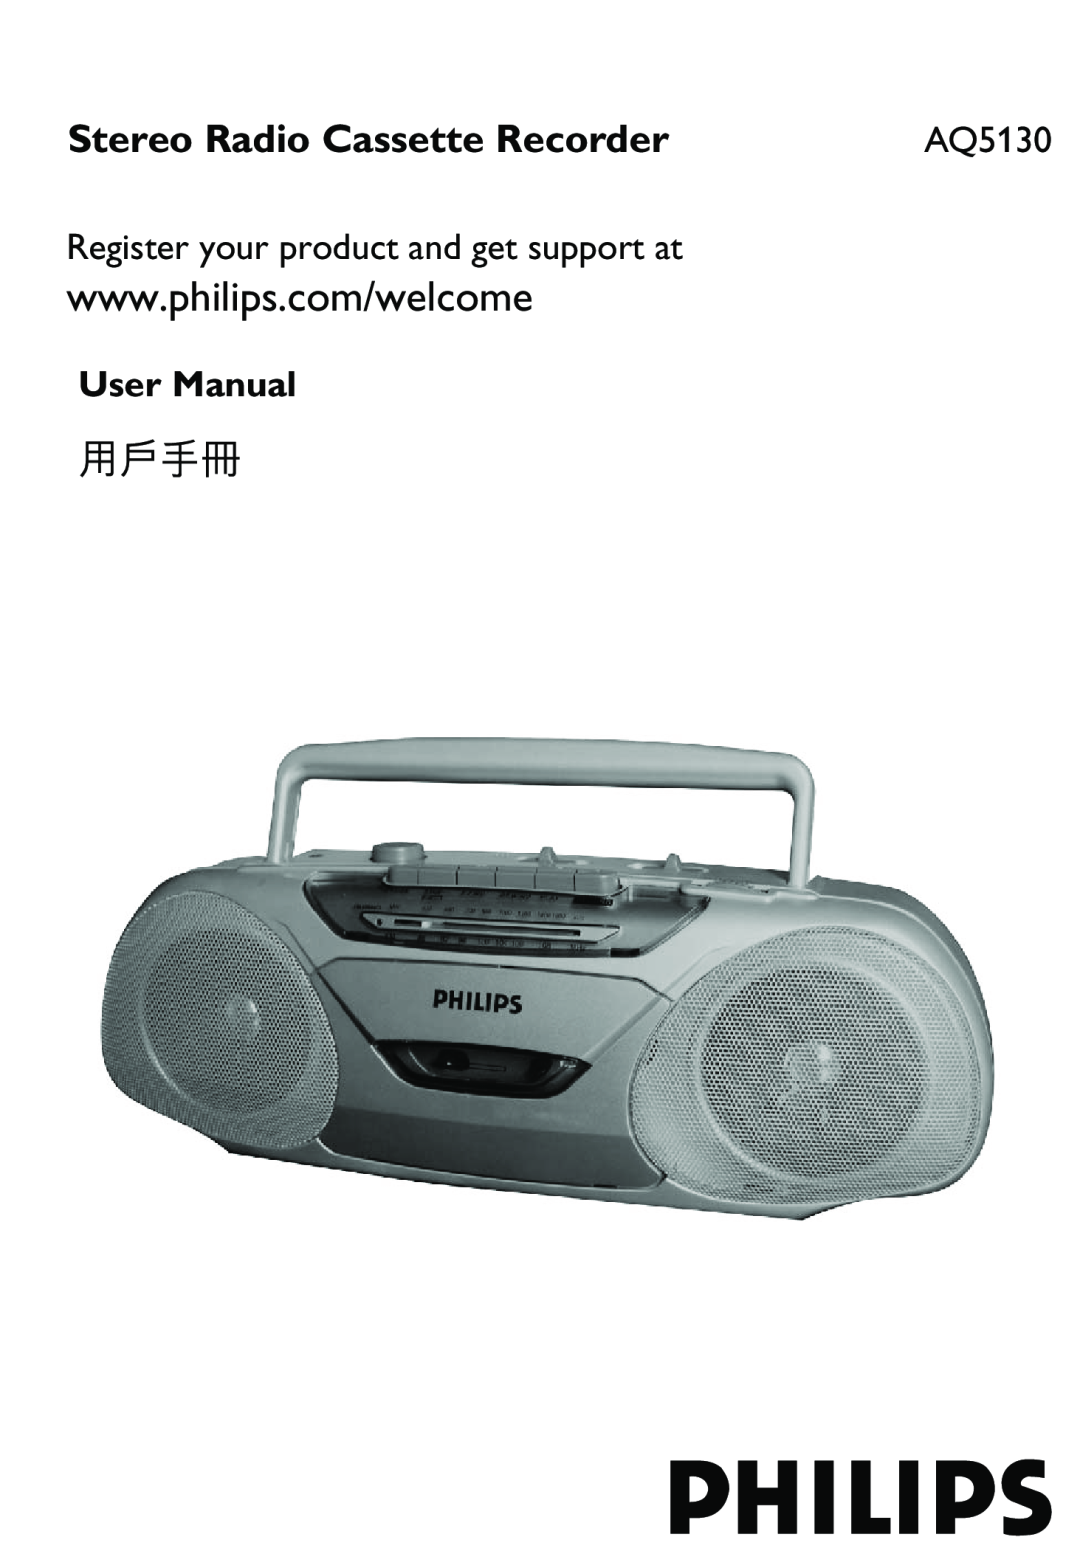 Philips AQ5130/98 user manual Stereo Radio Cassette Recorder, Register your product and get support at 